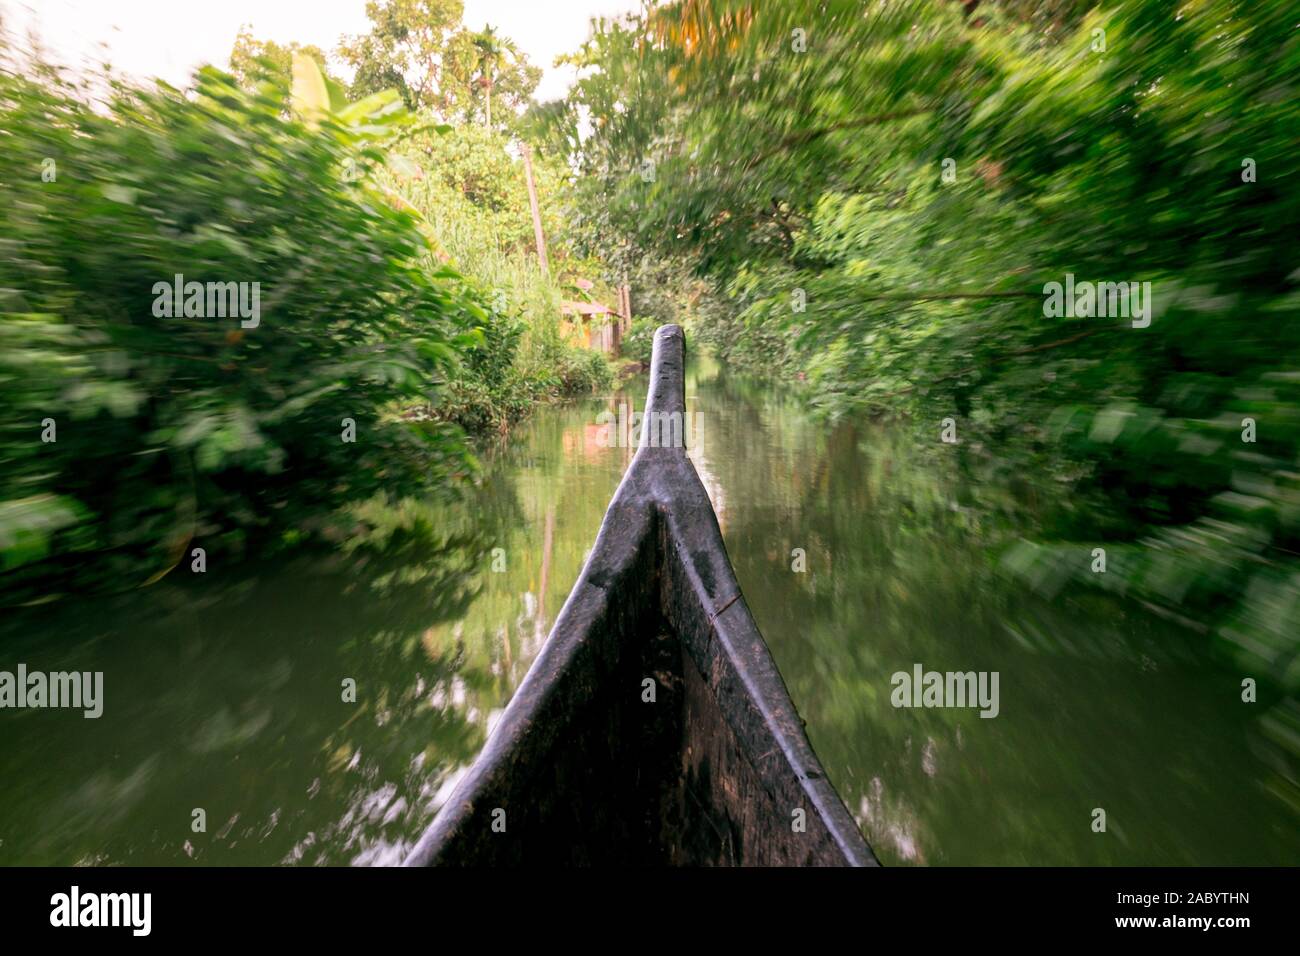 riding wood fishing boat in kerala backwaters village water channel under palm trees, a pristine natural environment during monsoon season Stock Photo